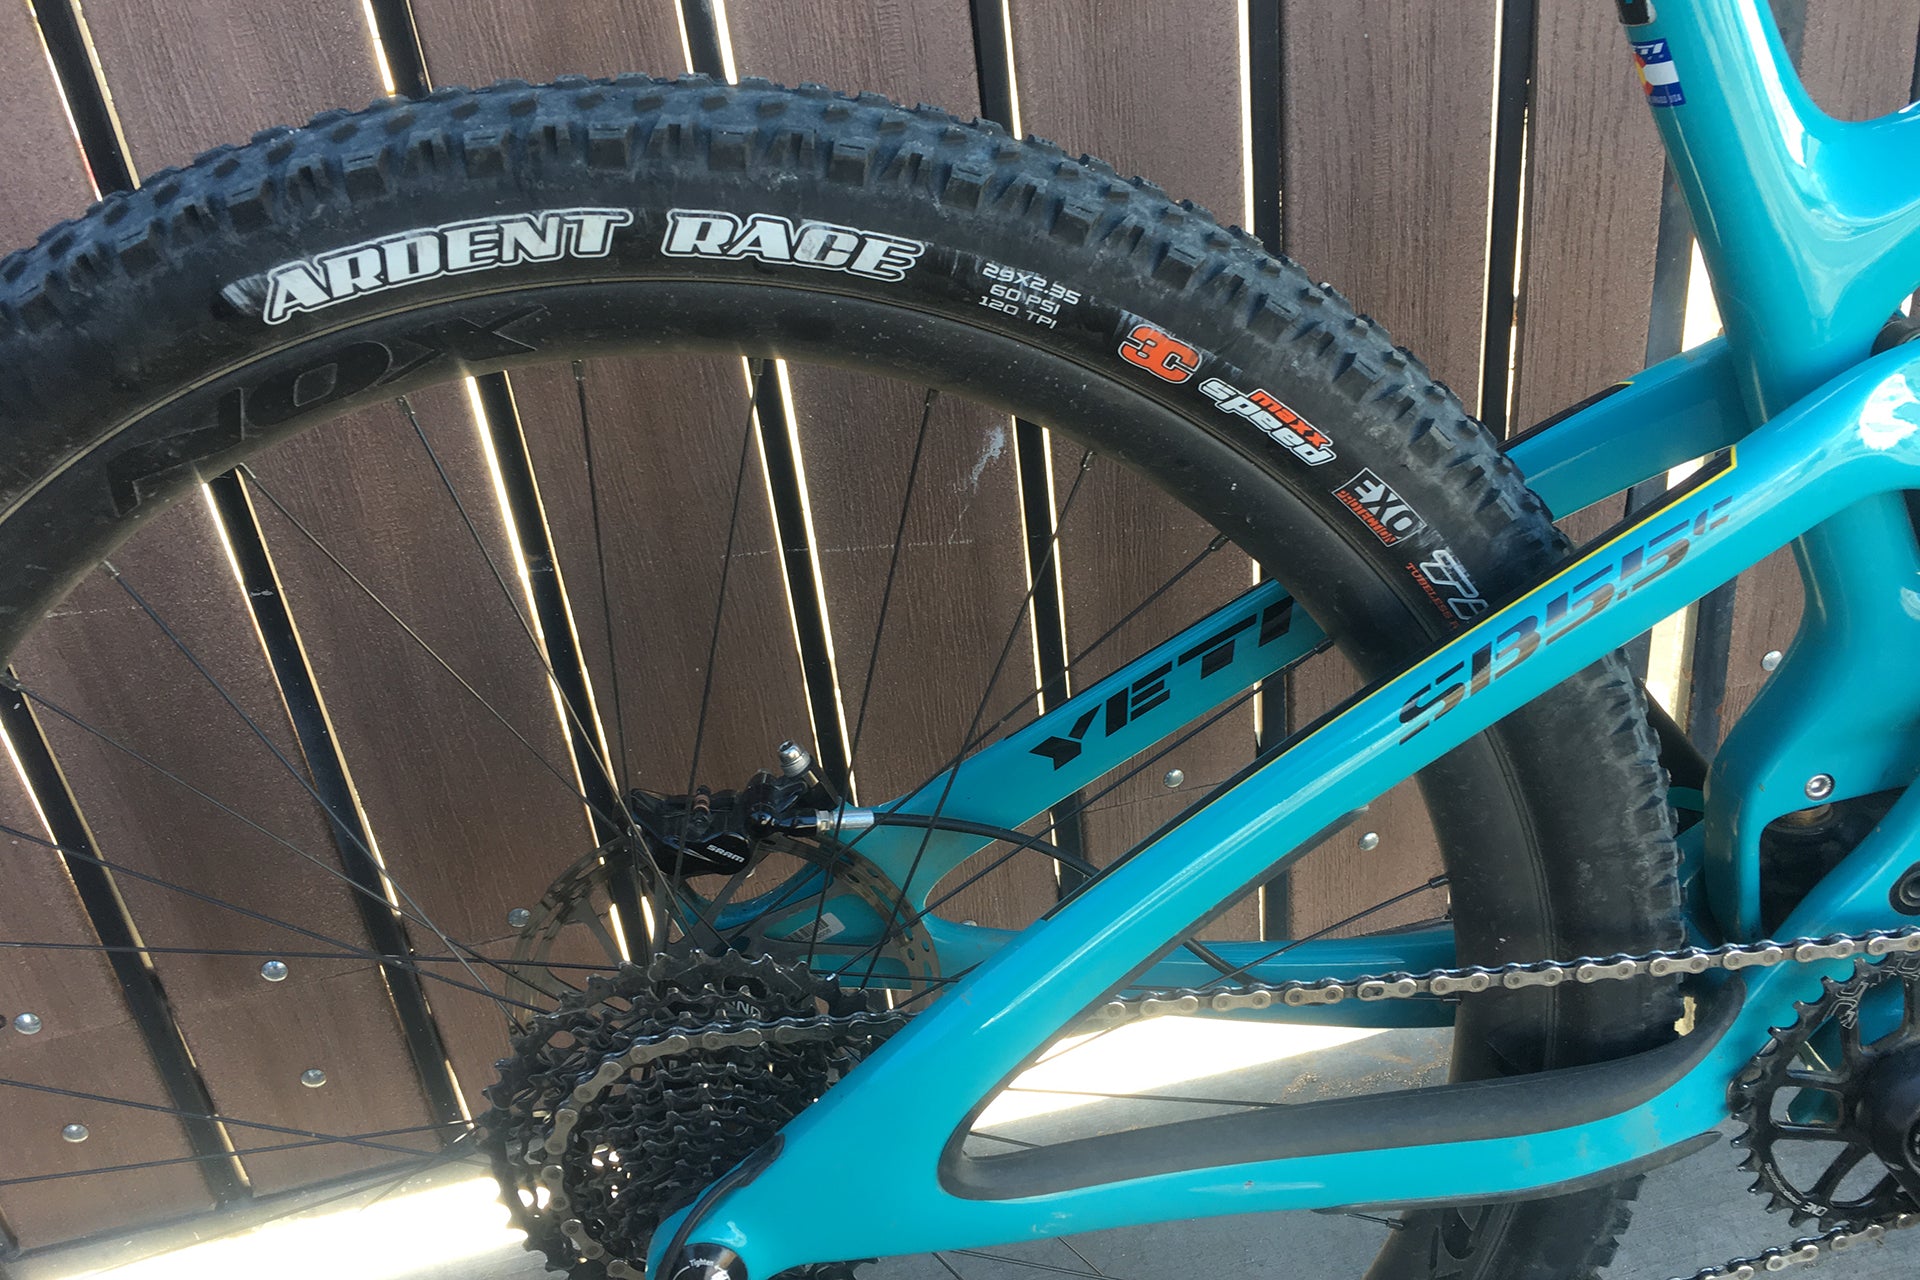 ardent maxxis 27.5